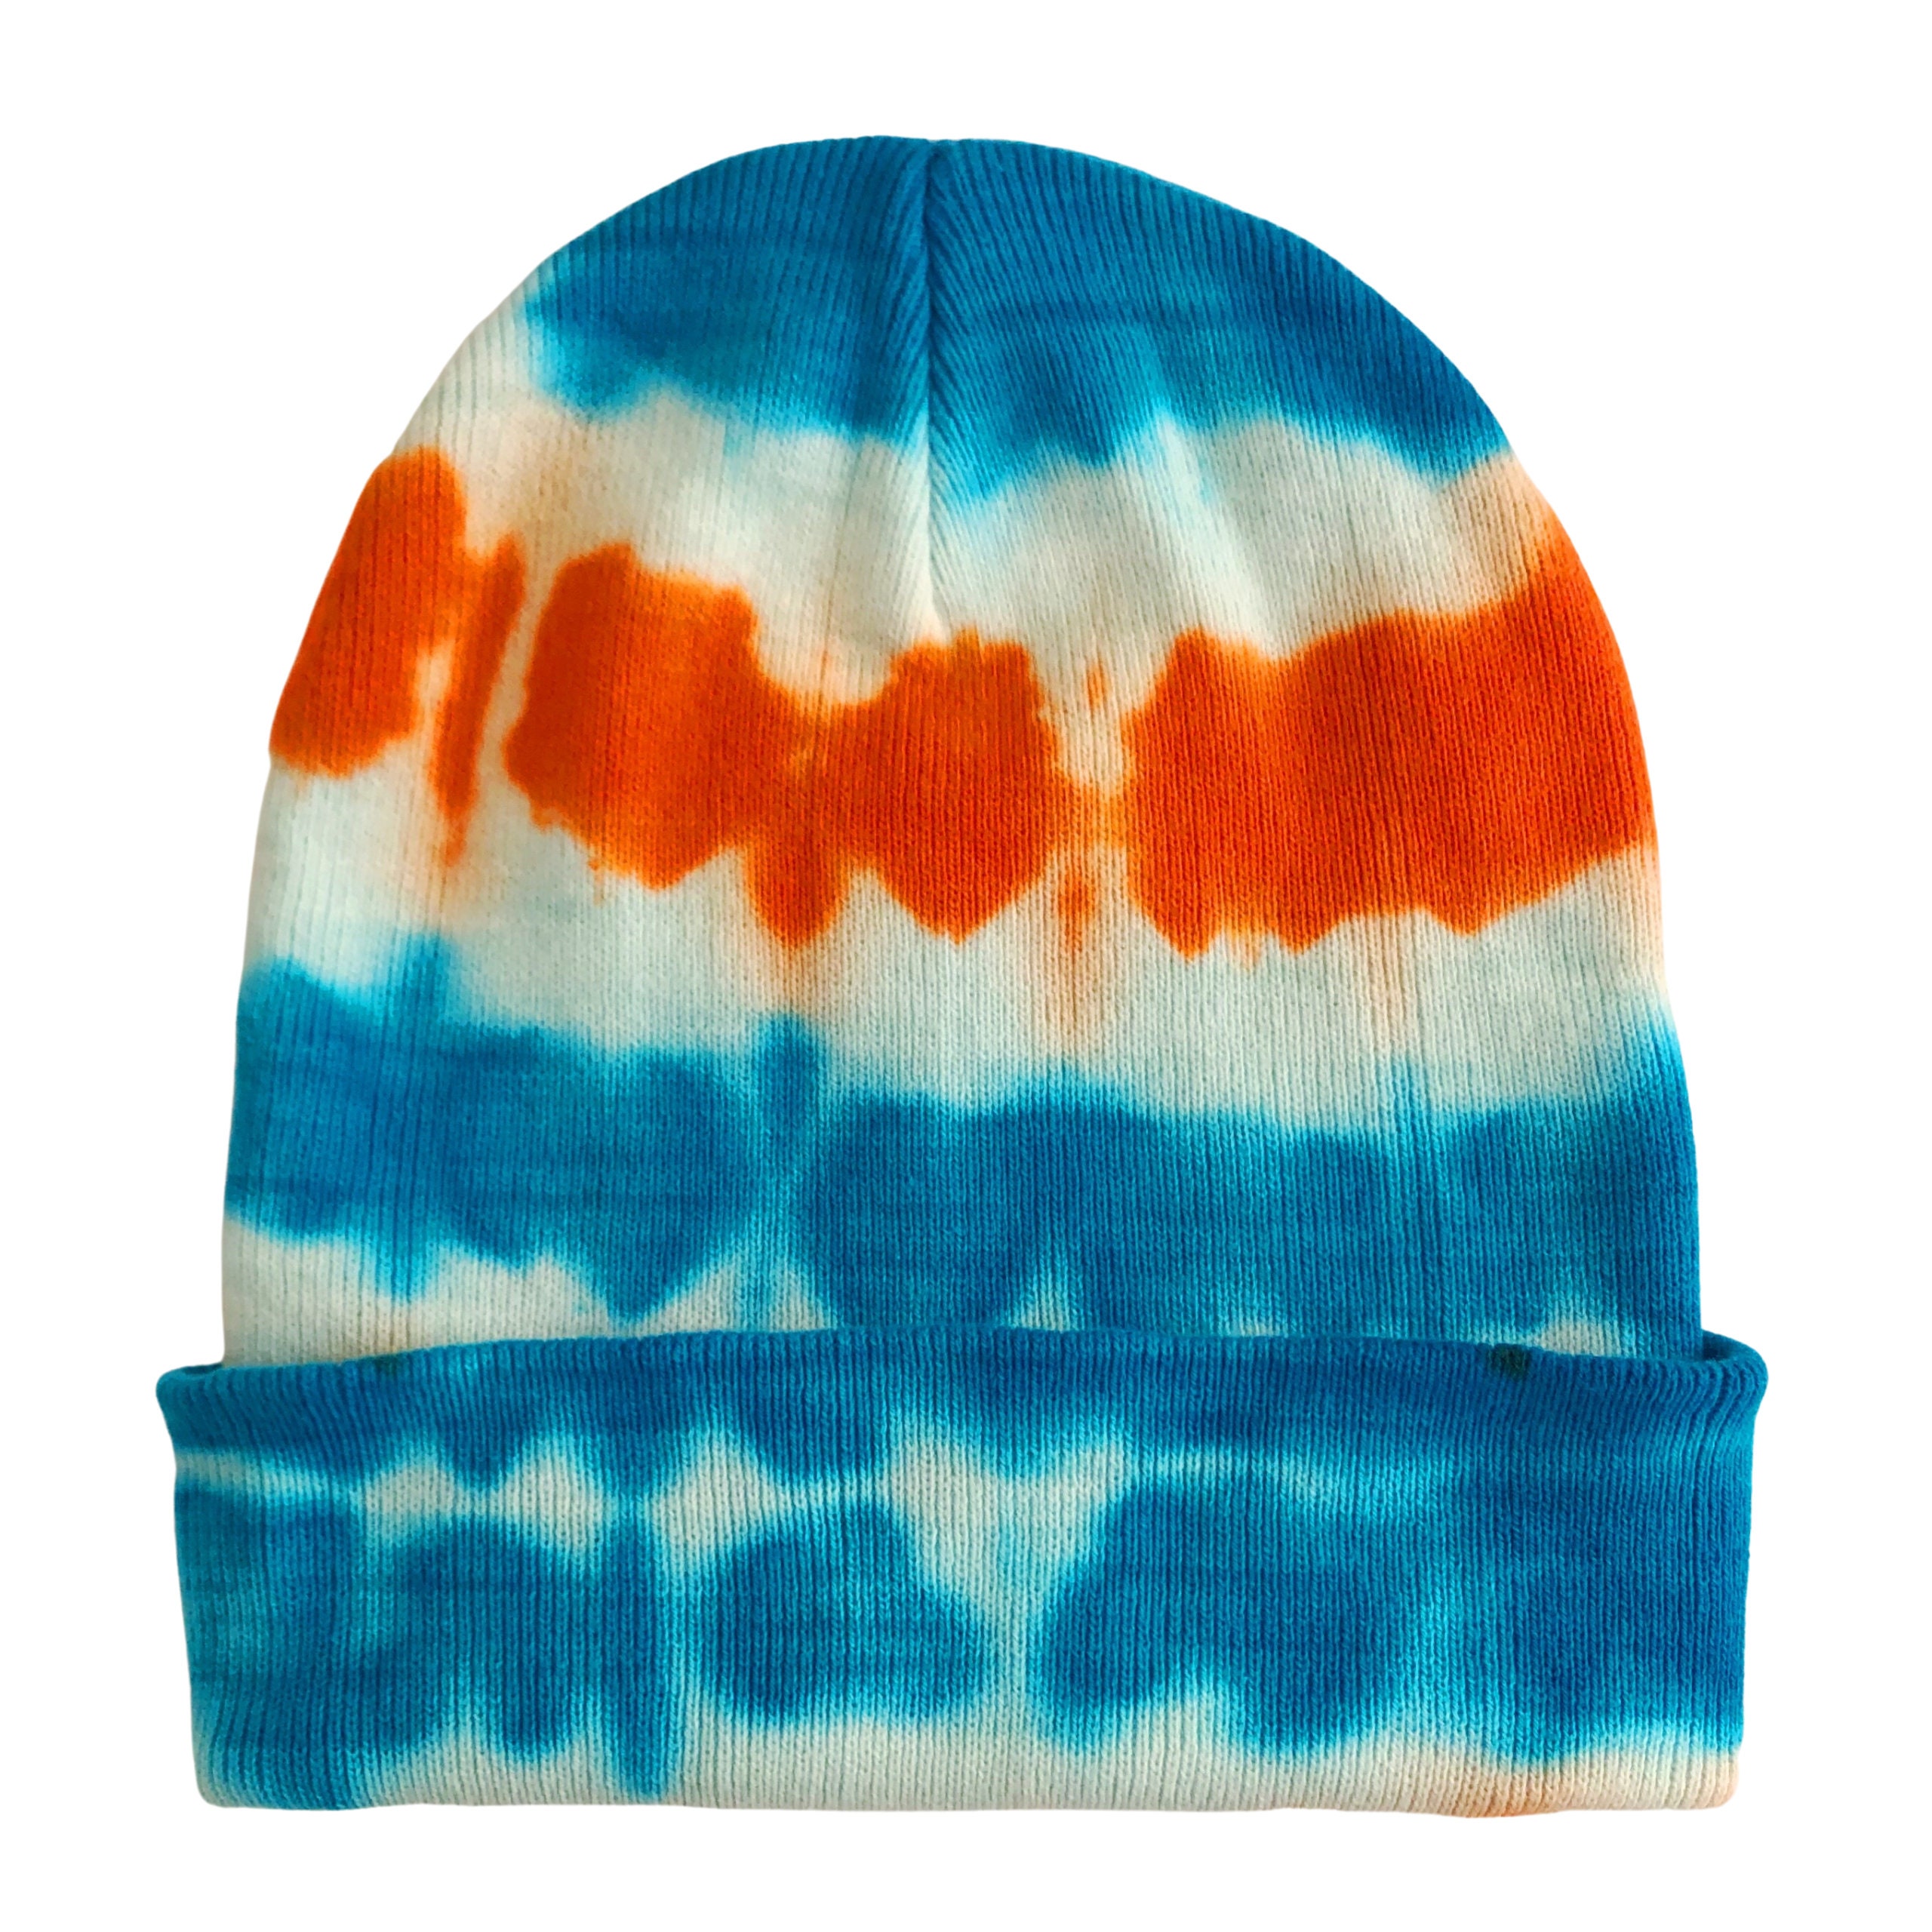 Tie Dye Beanie Hat for Men and Women, Turquoise and Orange - Etsy